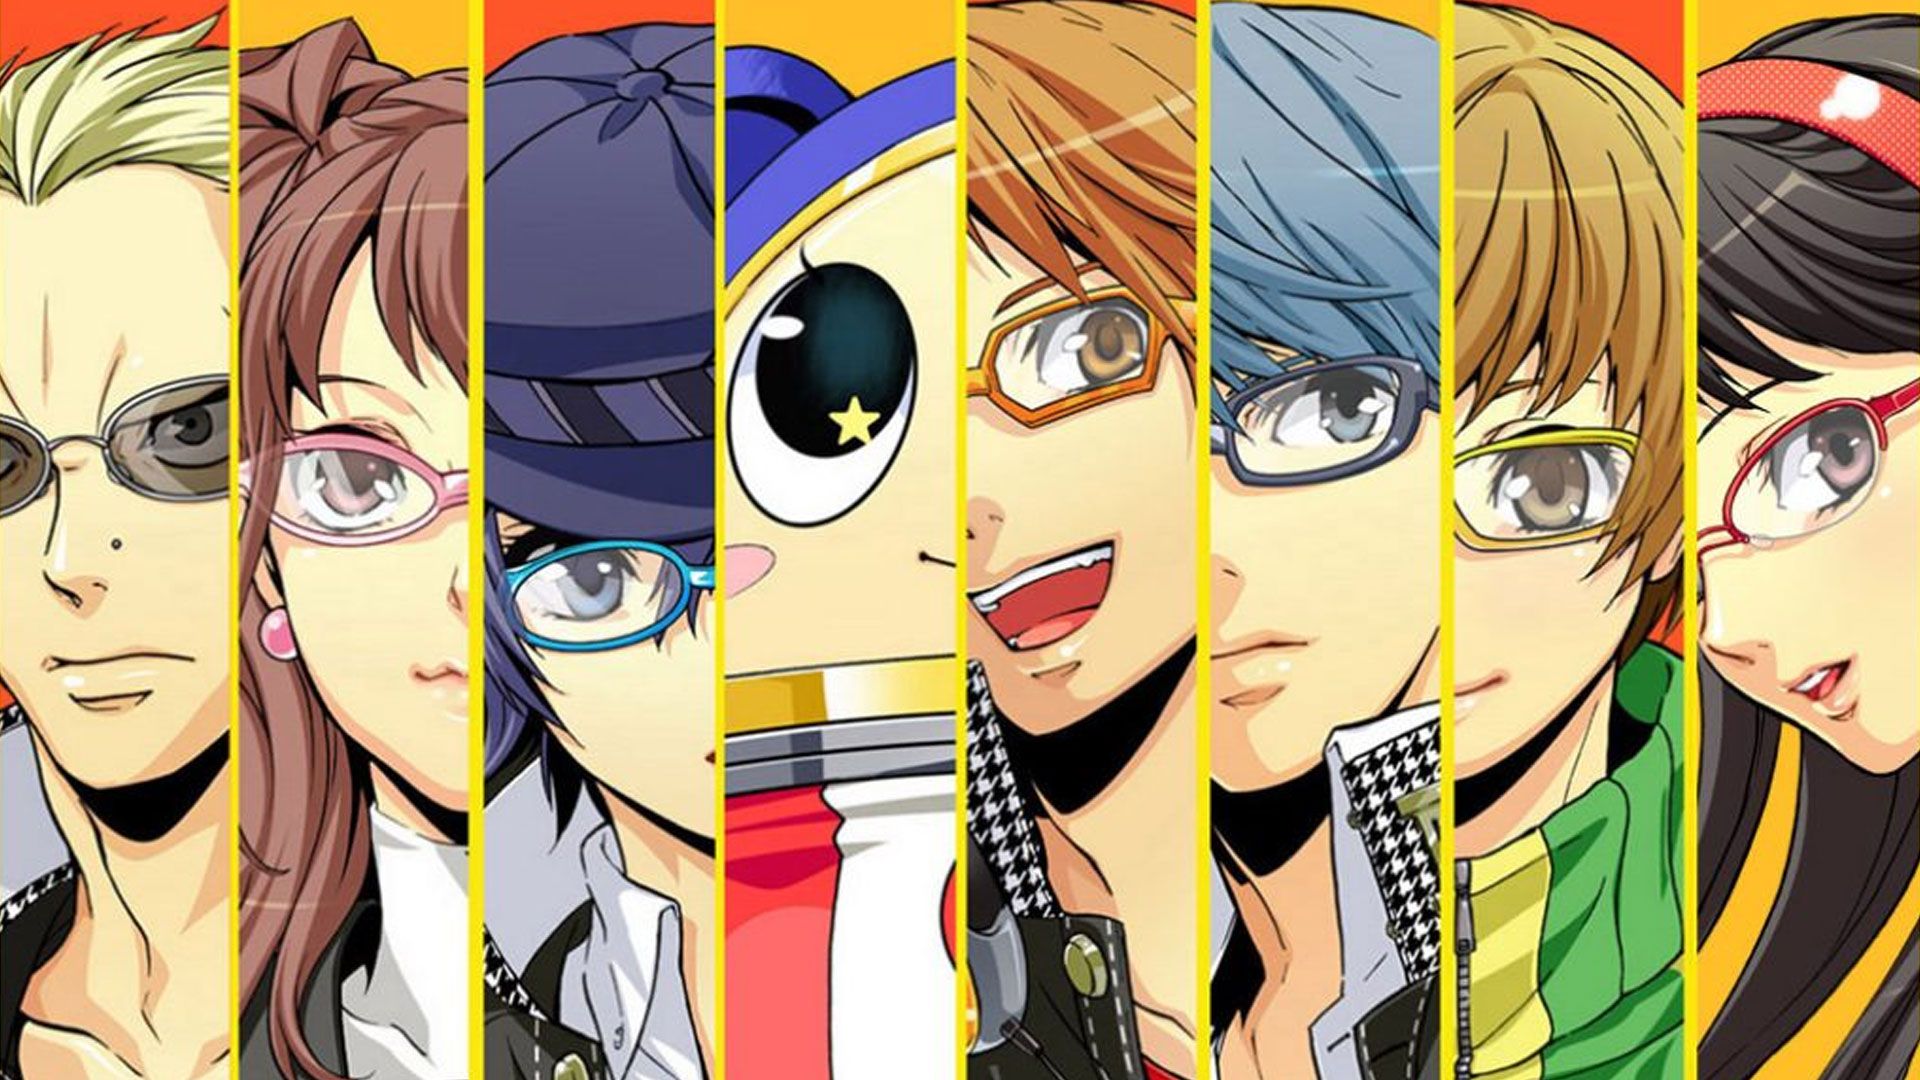 Persona 4 Golden PC runs perfectly, and even after Persona 5 Royal